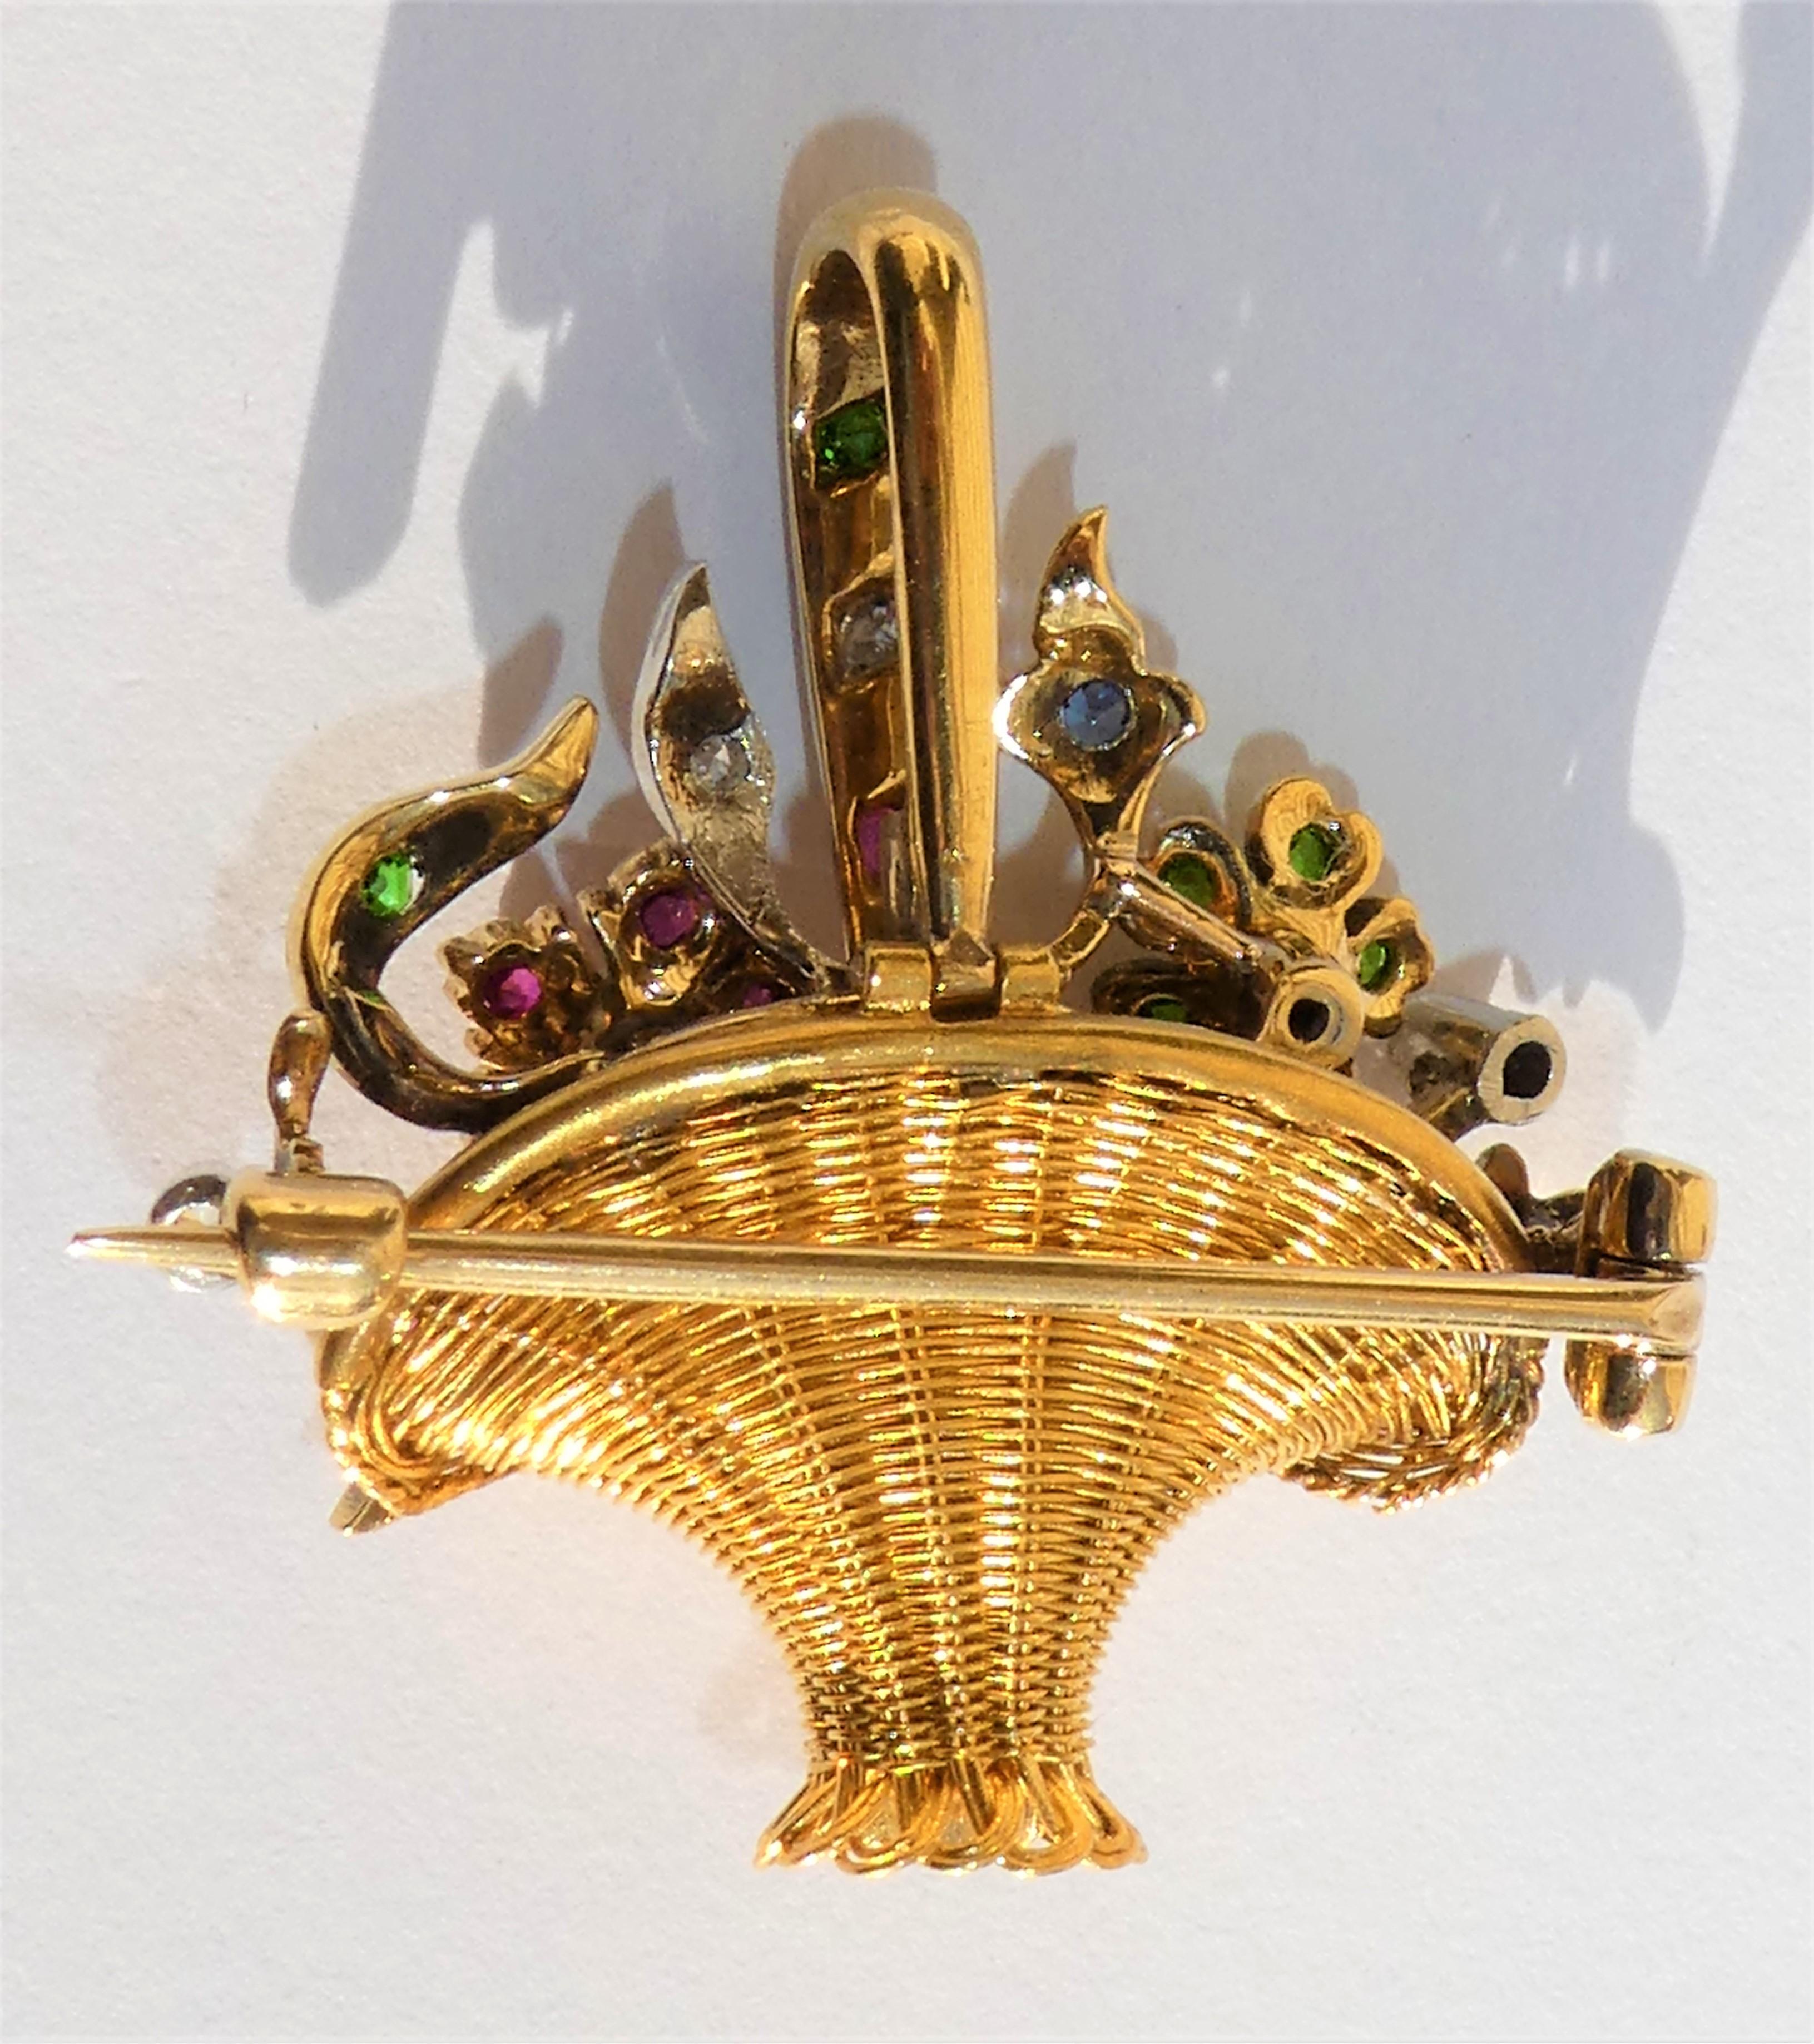 This lovely brooch was crafted circa 1920 in 18 karat yellow gold. The basket filled with flowers and leaves is hand-woven. This type of brooch is called Giardinetto - little garden - and can also be worn as a pendant on a chain. 
6 round old mine